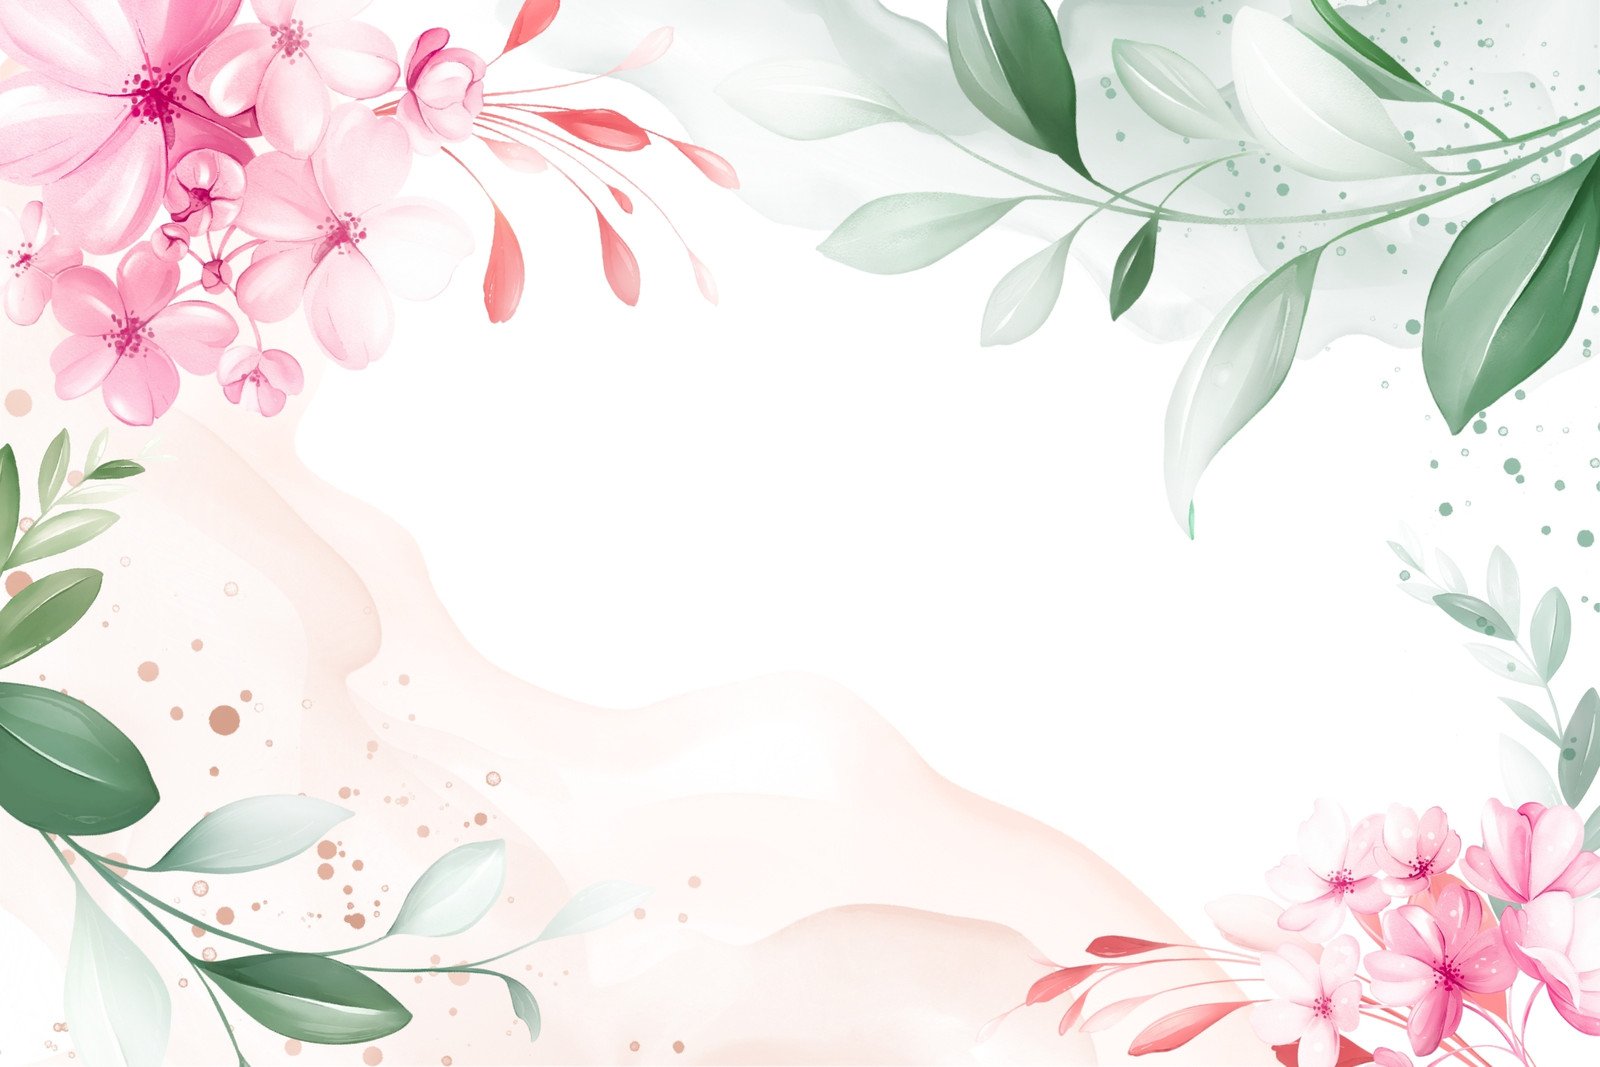 Canva Colorful Watercolor Floral Linktree Background QRHfsd 4Nmc 